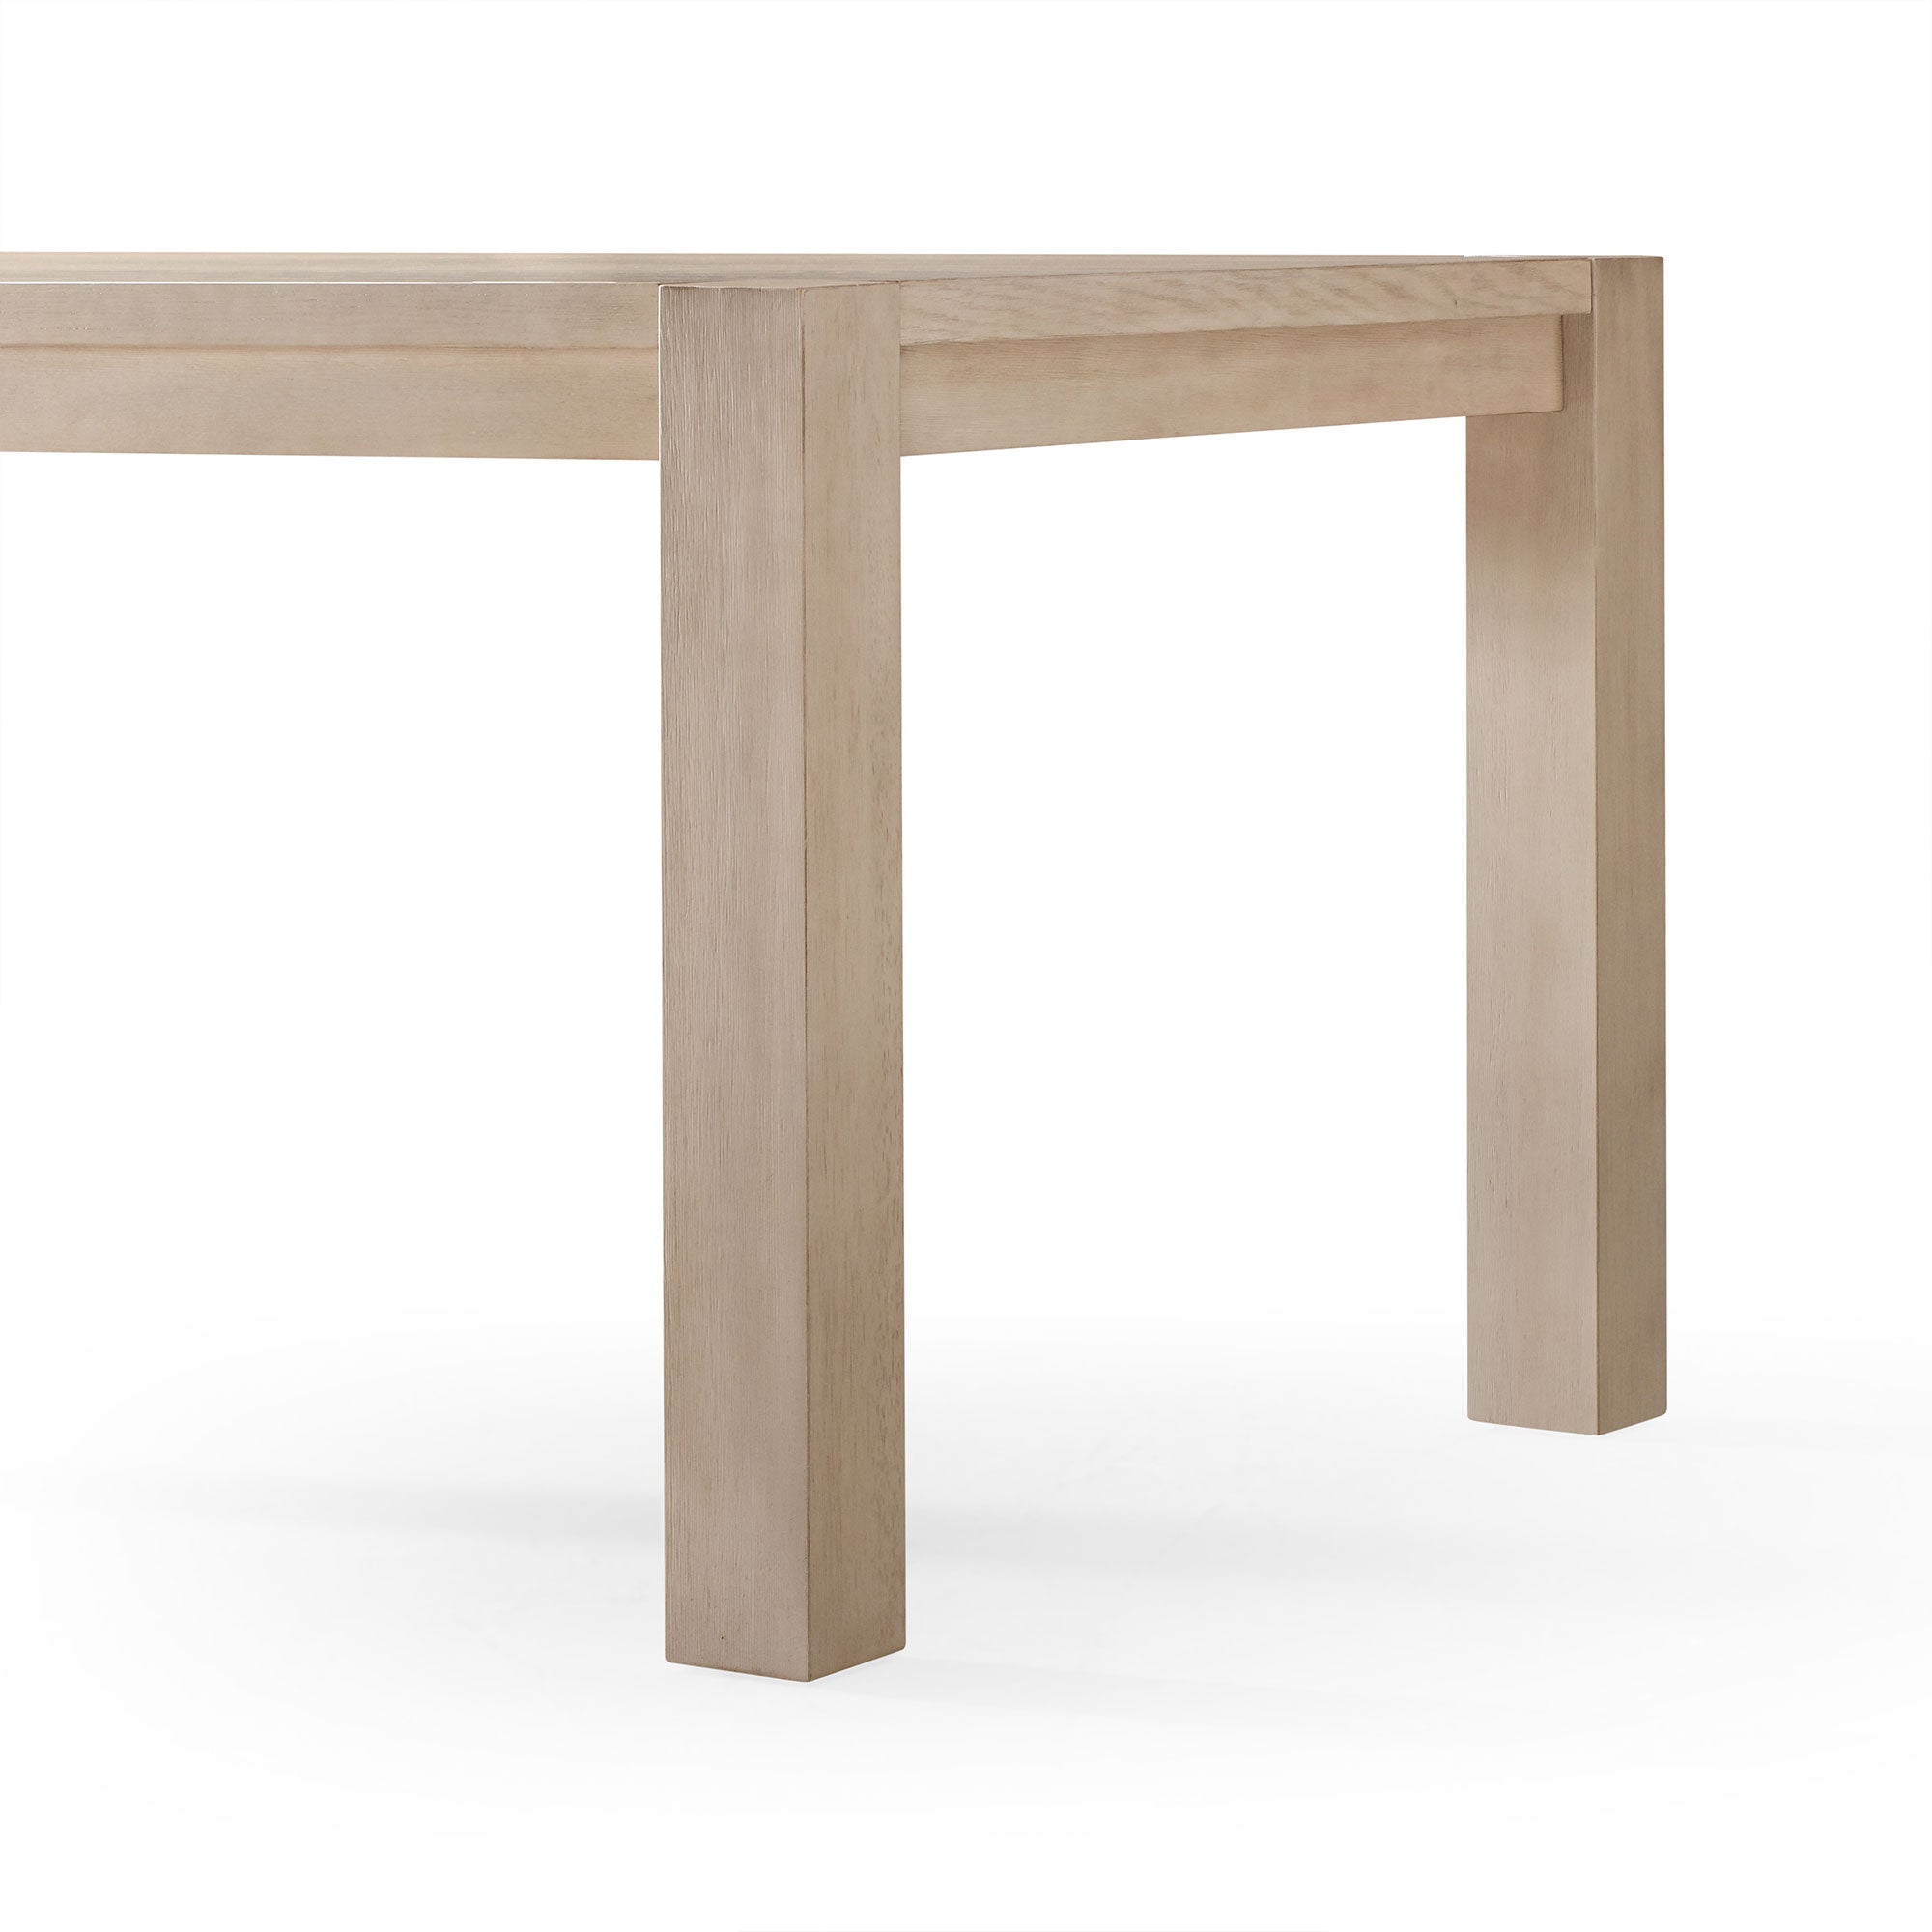 Cleo Contemporary Wooden Dining Table in Refined White Finish in Dining Furniture by Maven Lane